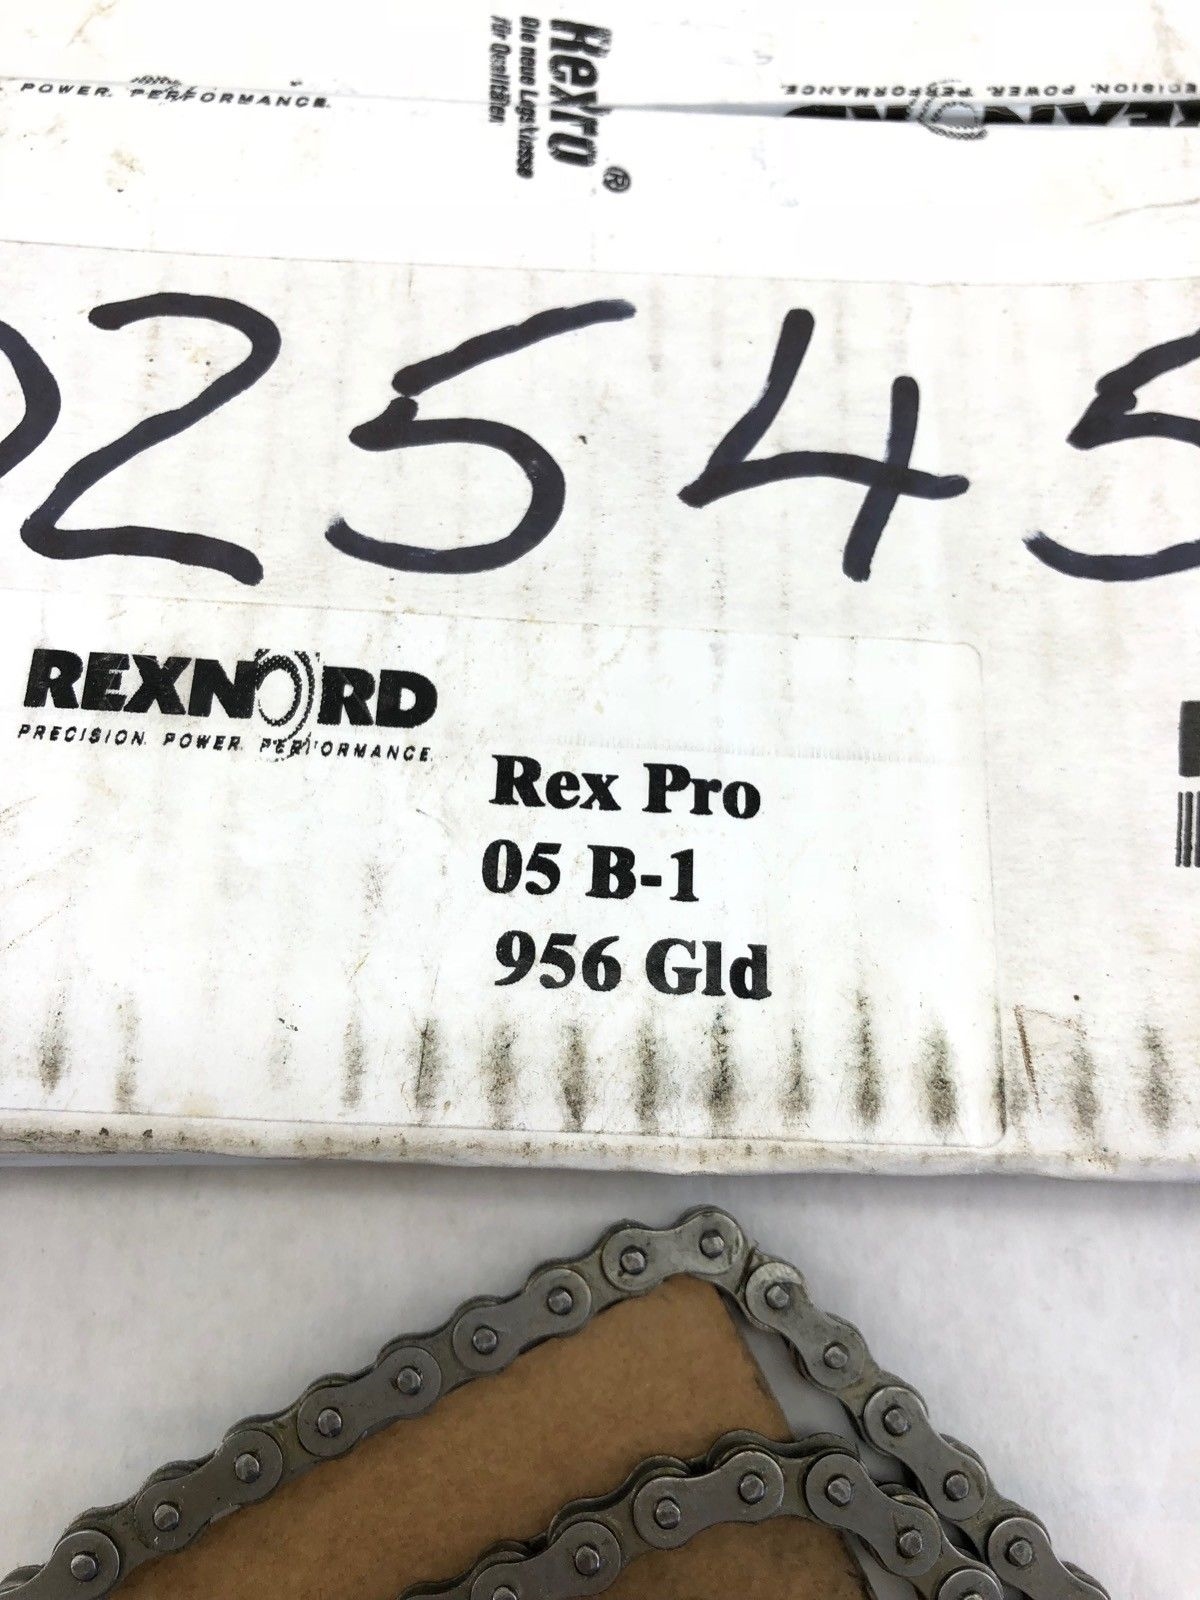 NEW IN BOX REXNORD 05B-1 10 FEET REX ROLLER CHAIN, 956 GLD, FAST SHIP! (H2) 2